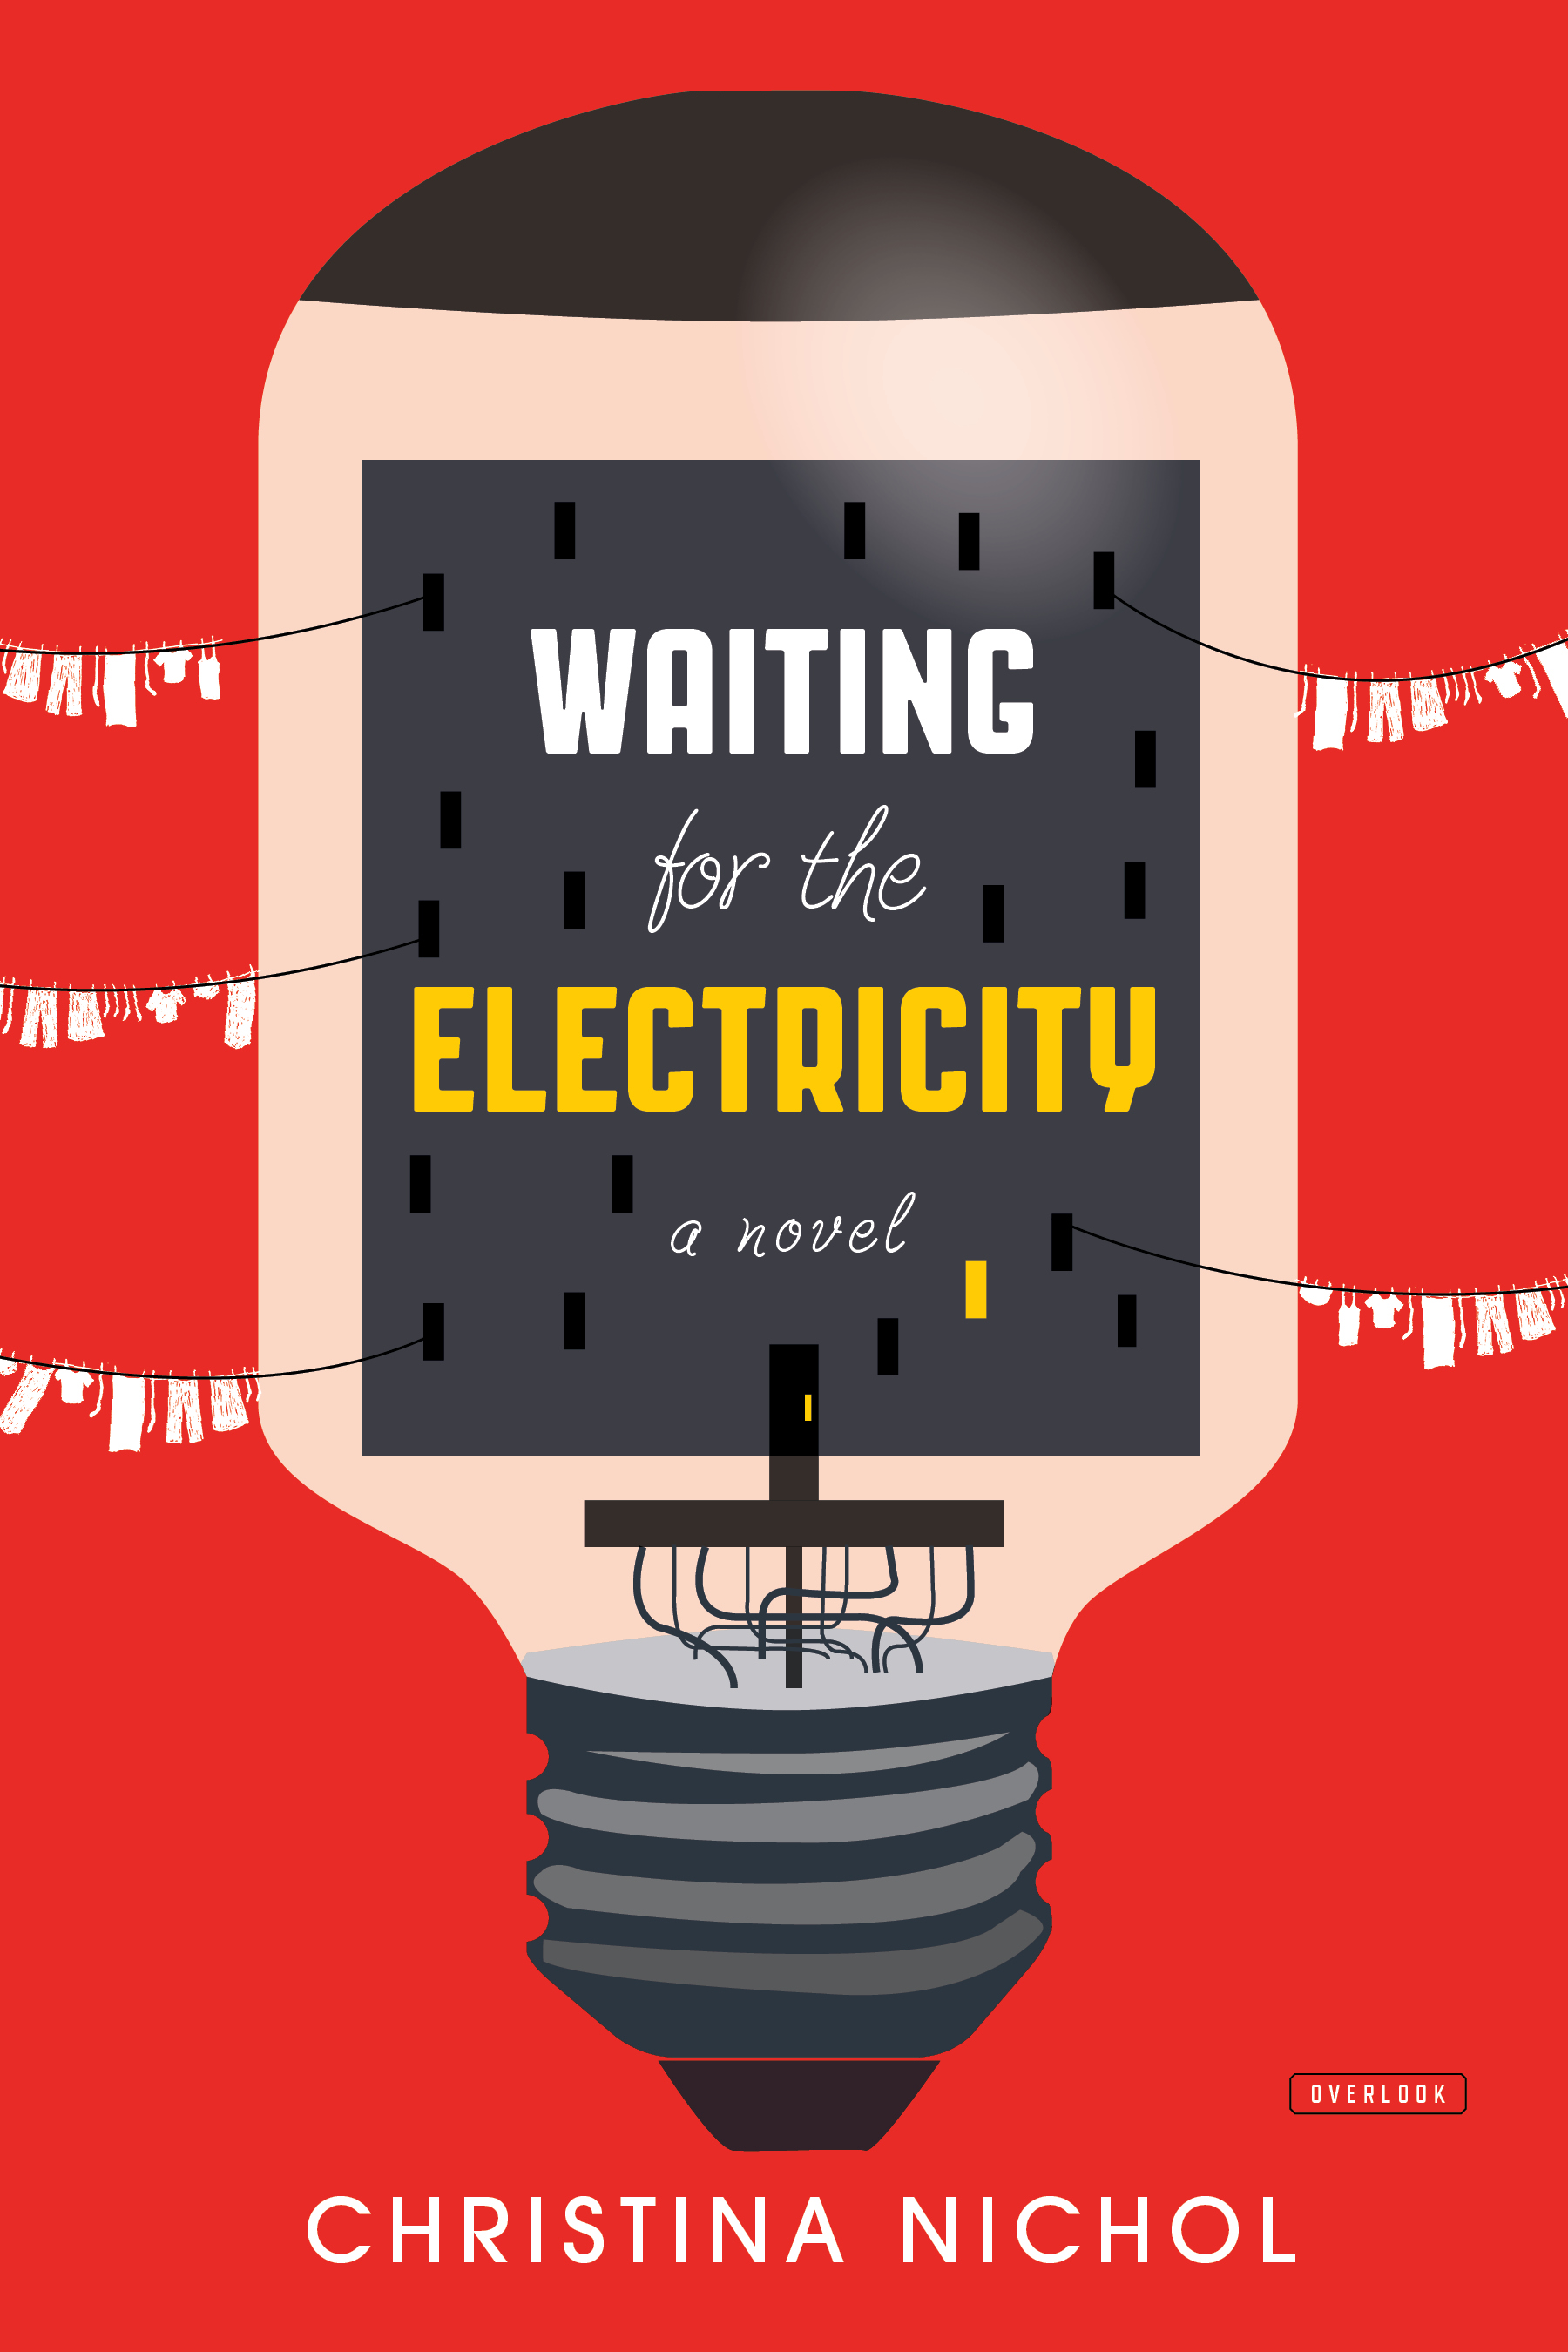 Reading & Discussion: Waiting for the Electricity by Christina Nichol, with Norman Rush and Marco Roth